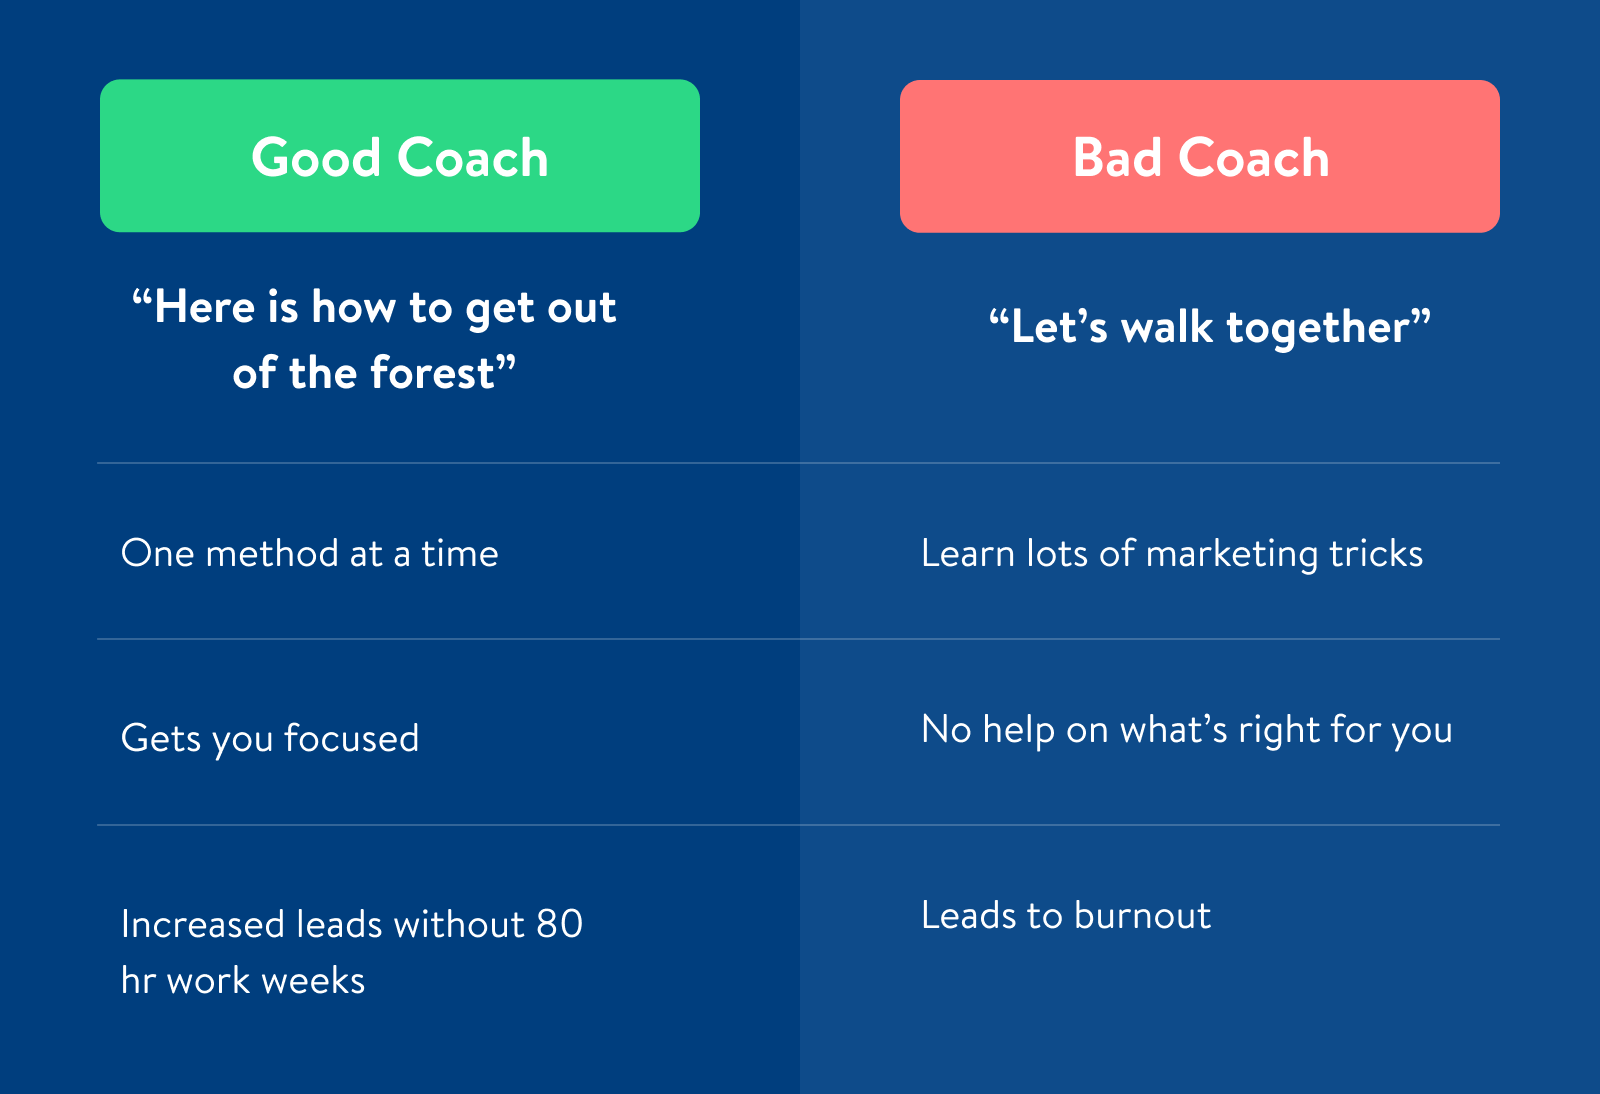 Good coach: Here is how to get out of the forest vs Bad coach: Let's walk together; Good coach: ONE method at a time vs Bad Coach: Learn lots of marketing tricks; Good coach: Gets you focused vs Bad coach: No help on what's right for you; Good coach: Increased leads without 80 hour work weeks vs Bad coach: Leads to burnout.